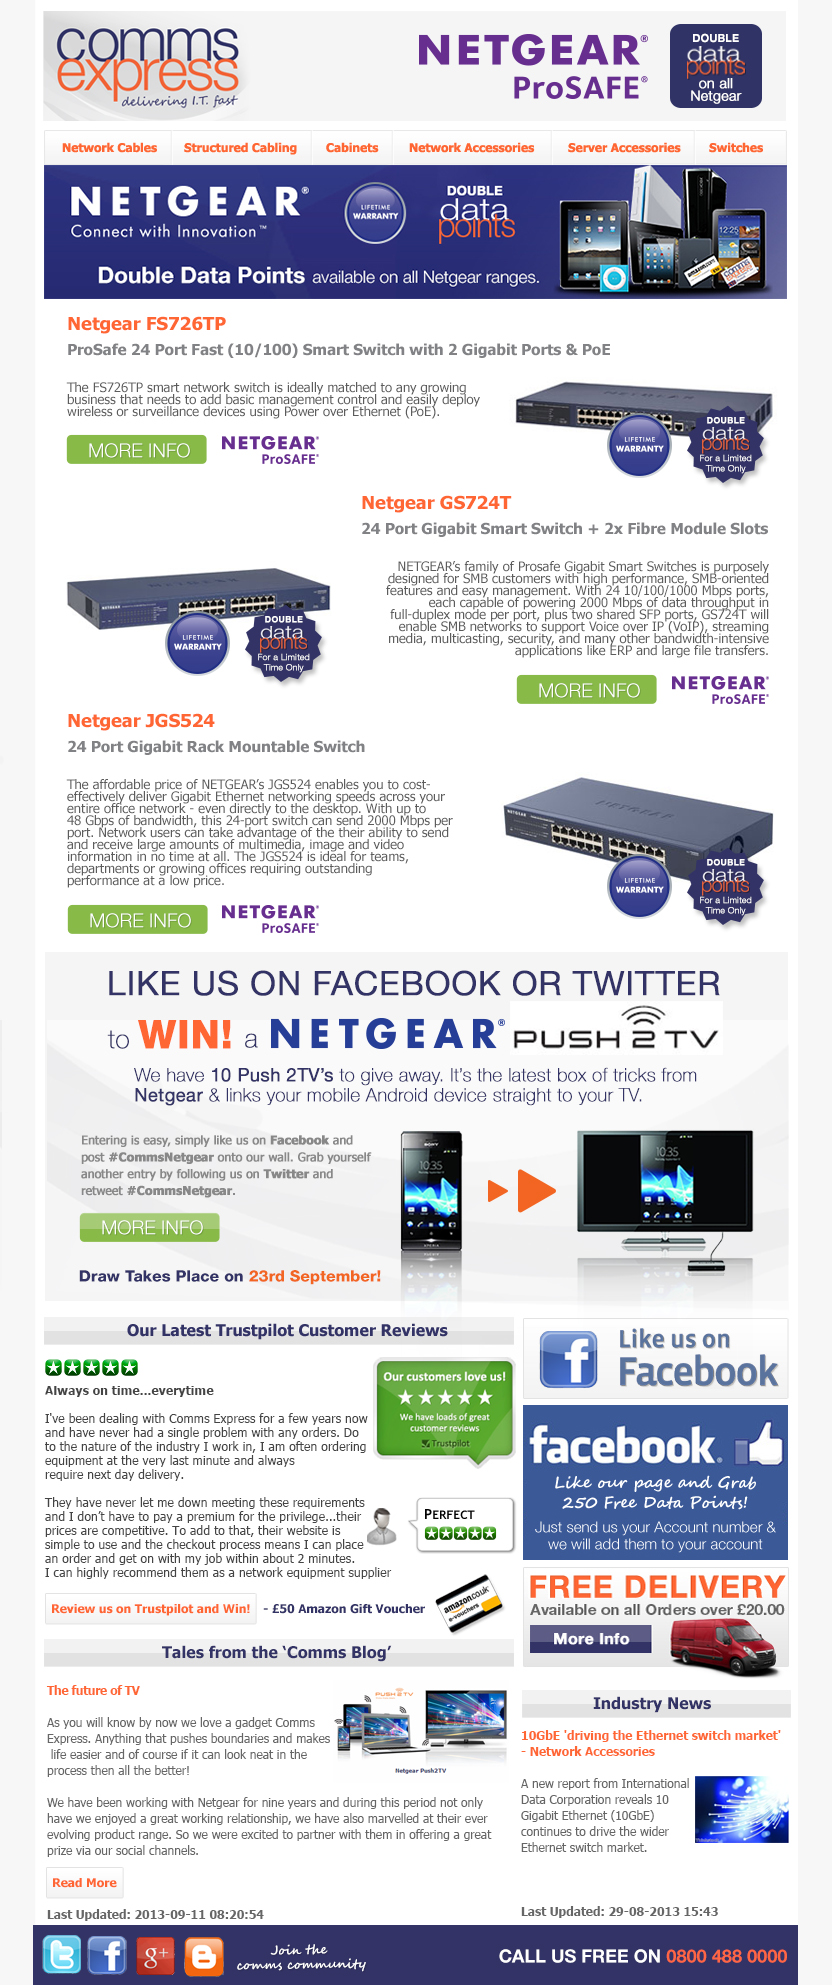  Double Data Points on all Netgear Ranges from Comms Ex